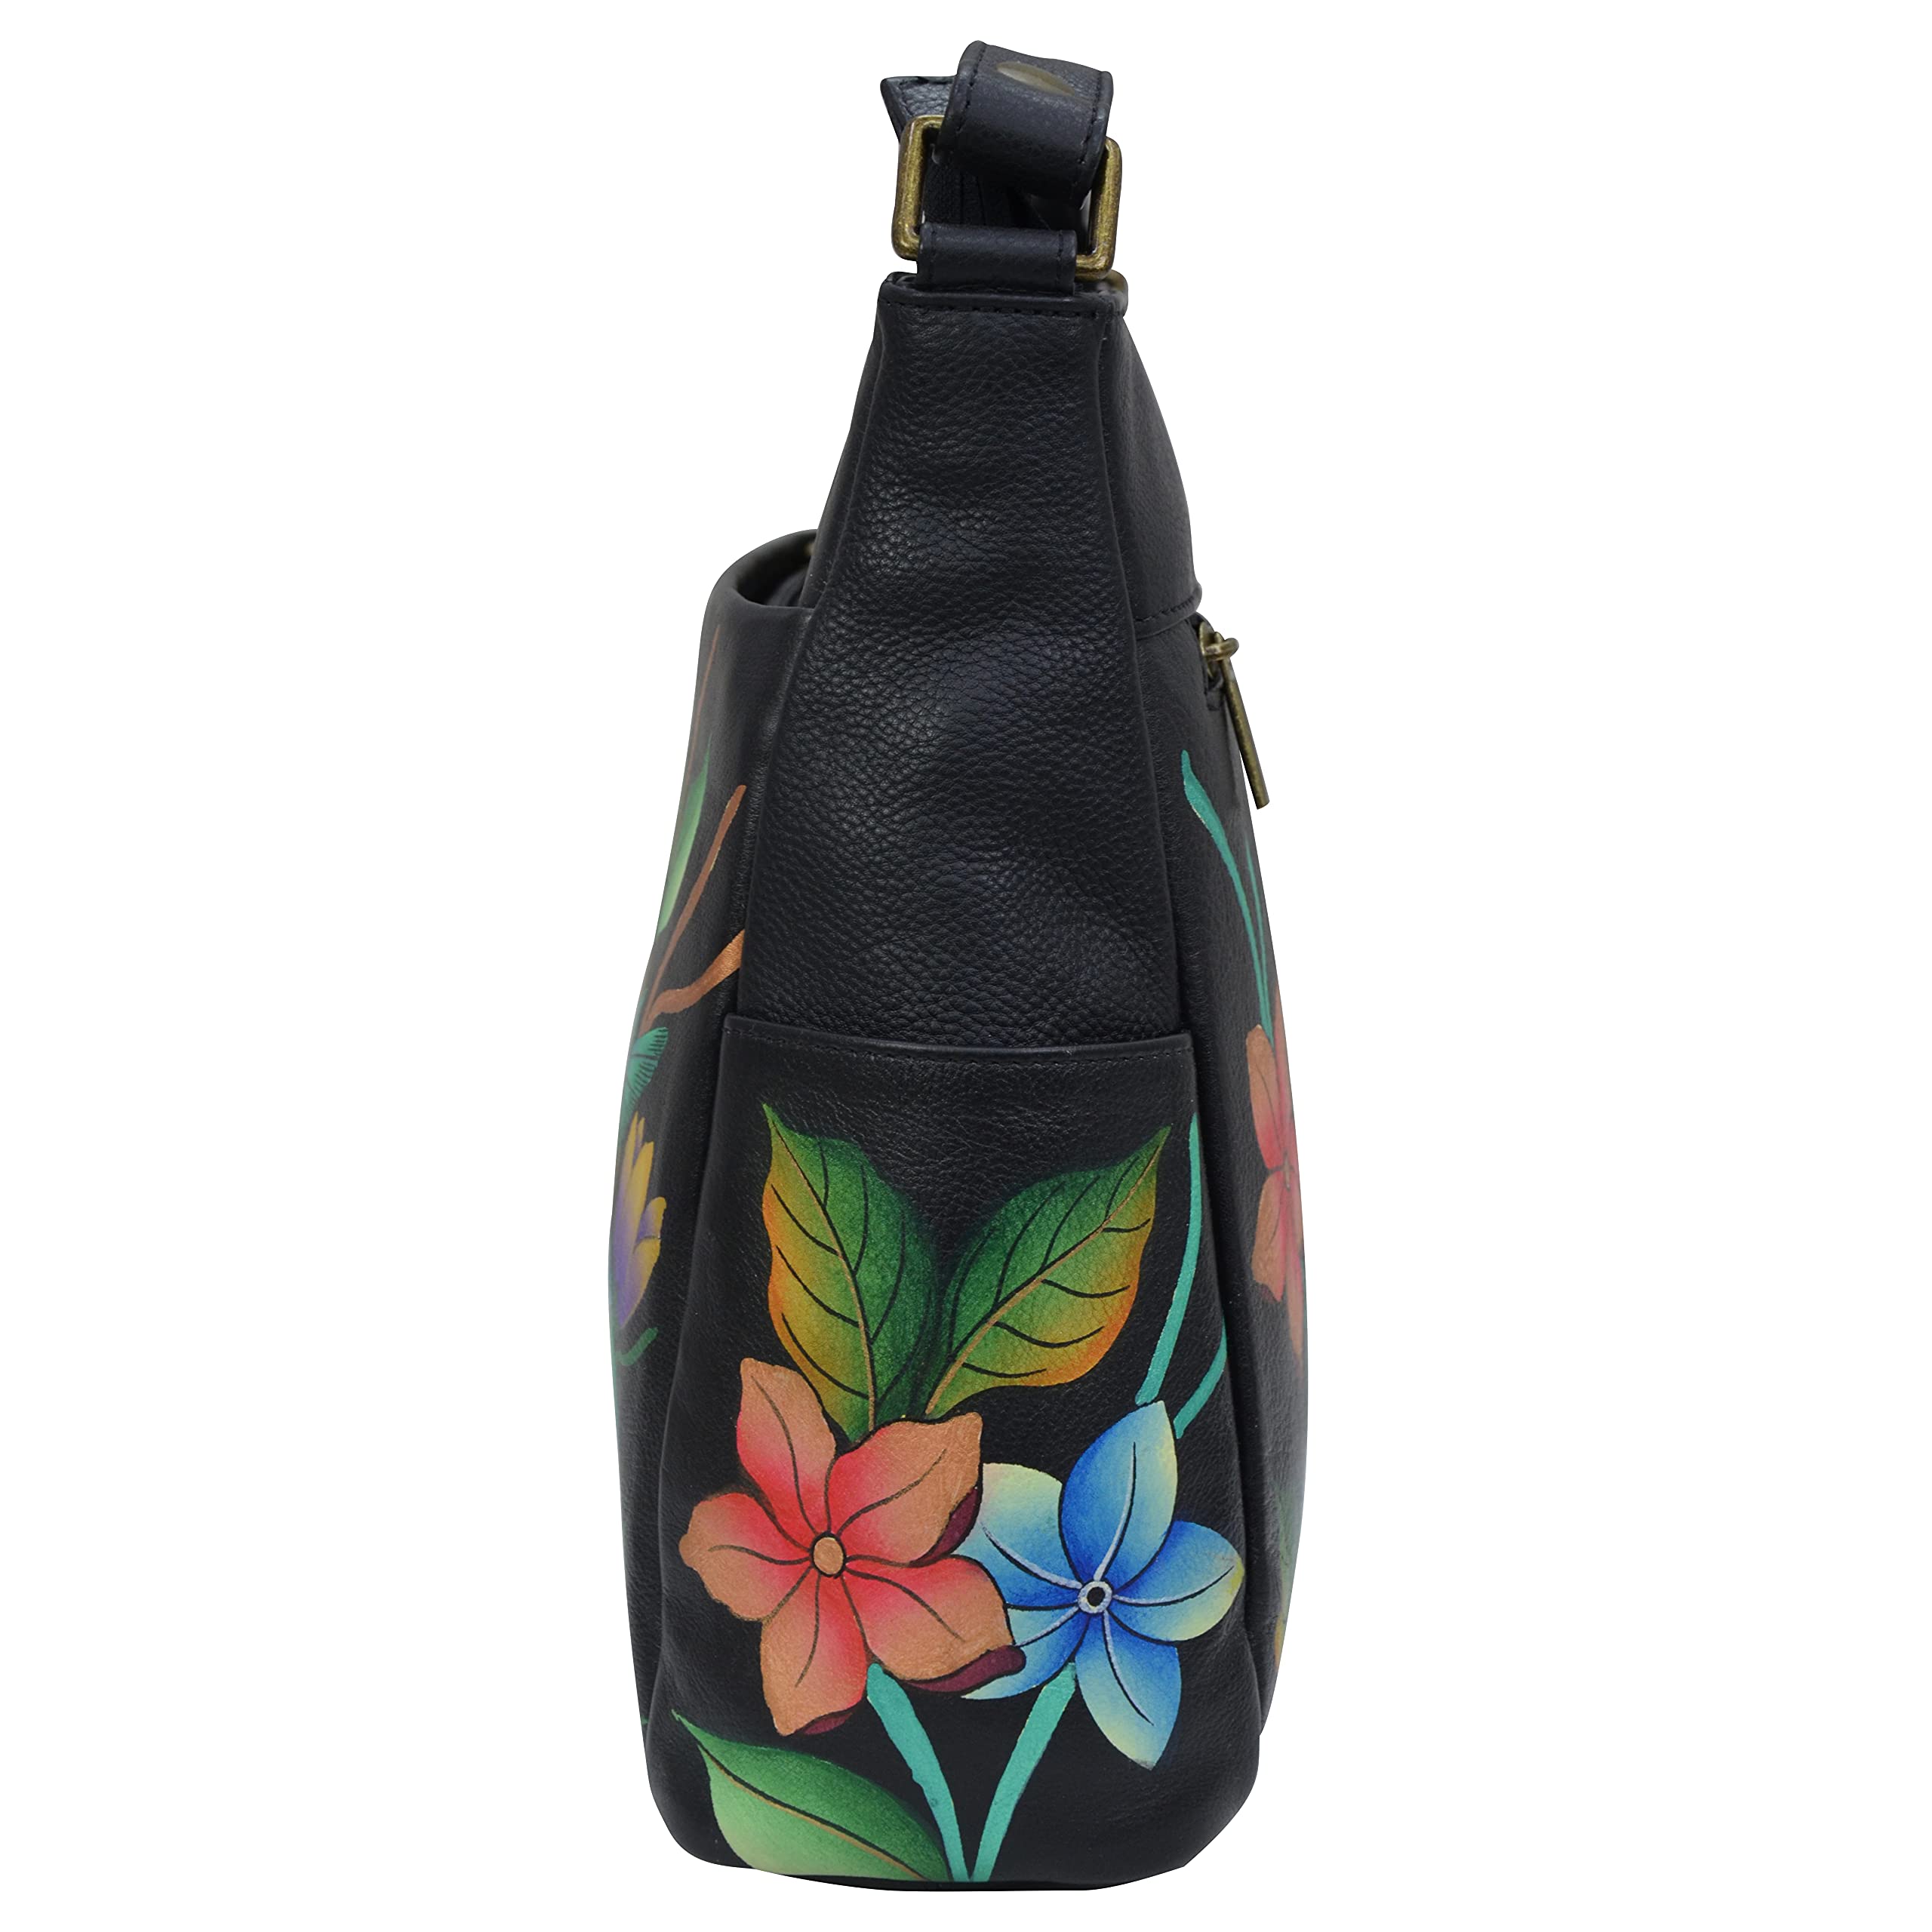 Anna by Anuschka Hand Painted Leather Women's Crossbody with Side Pockets